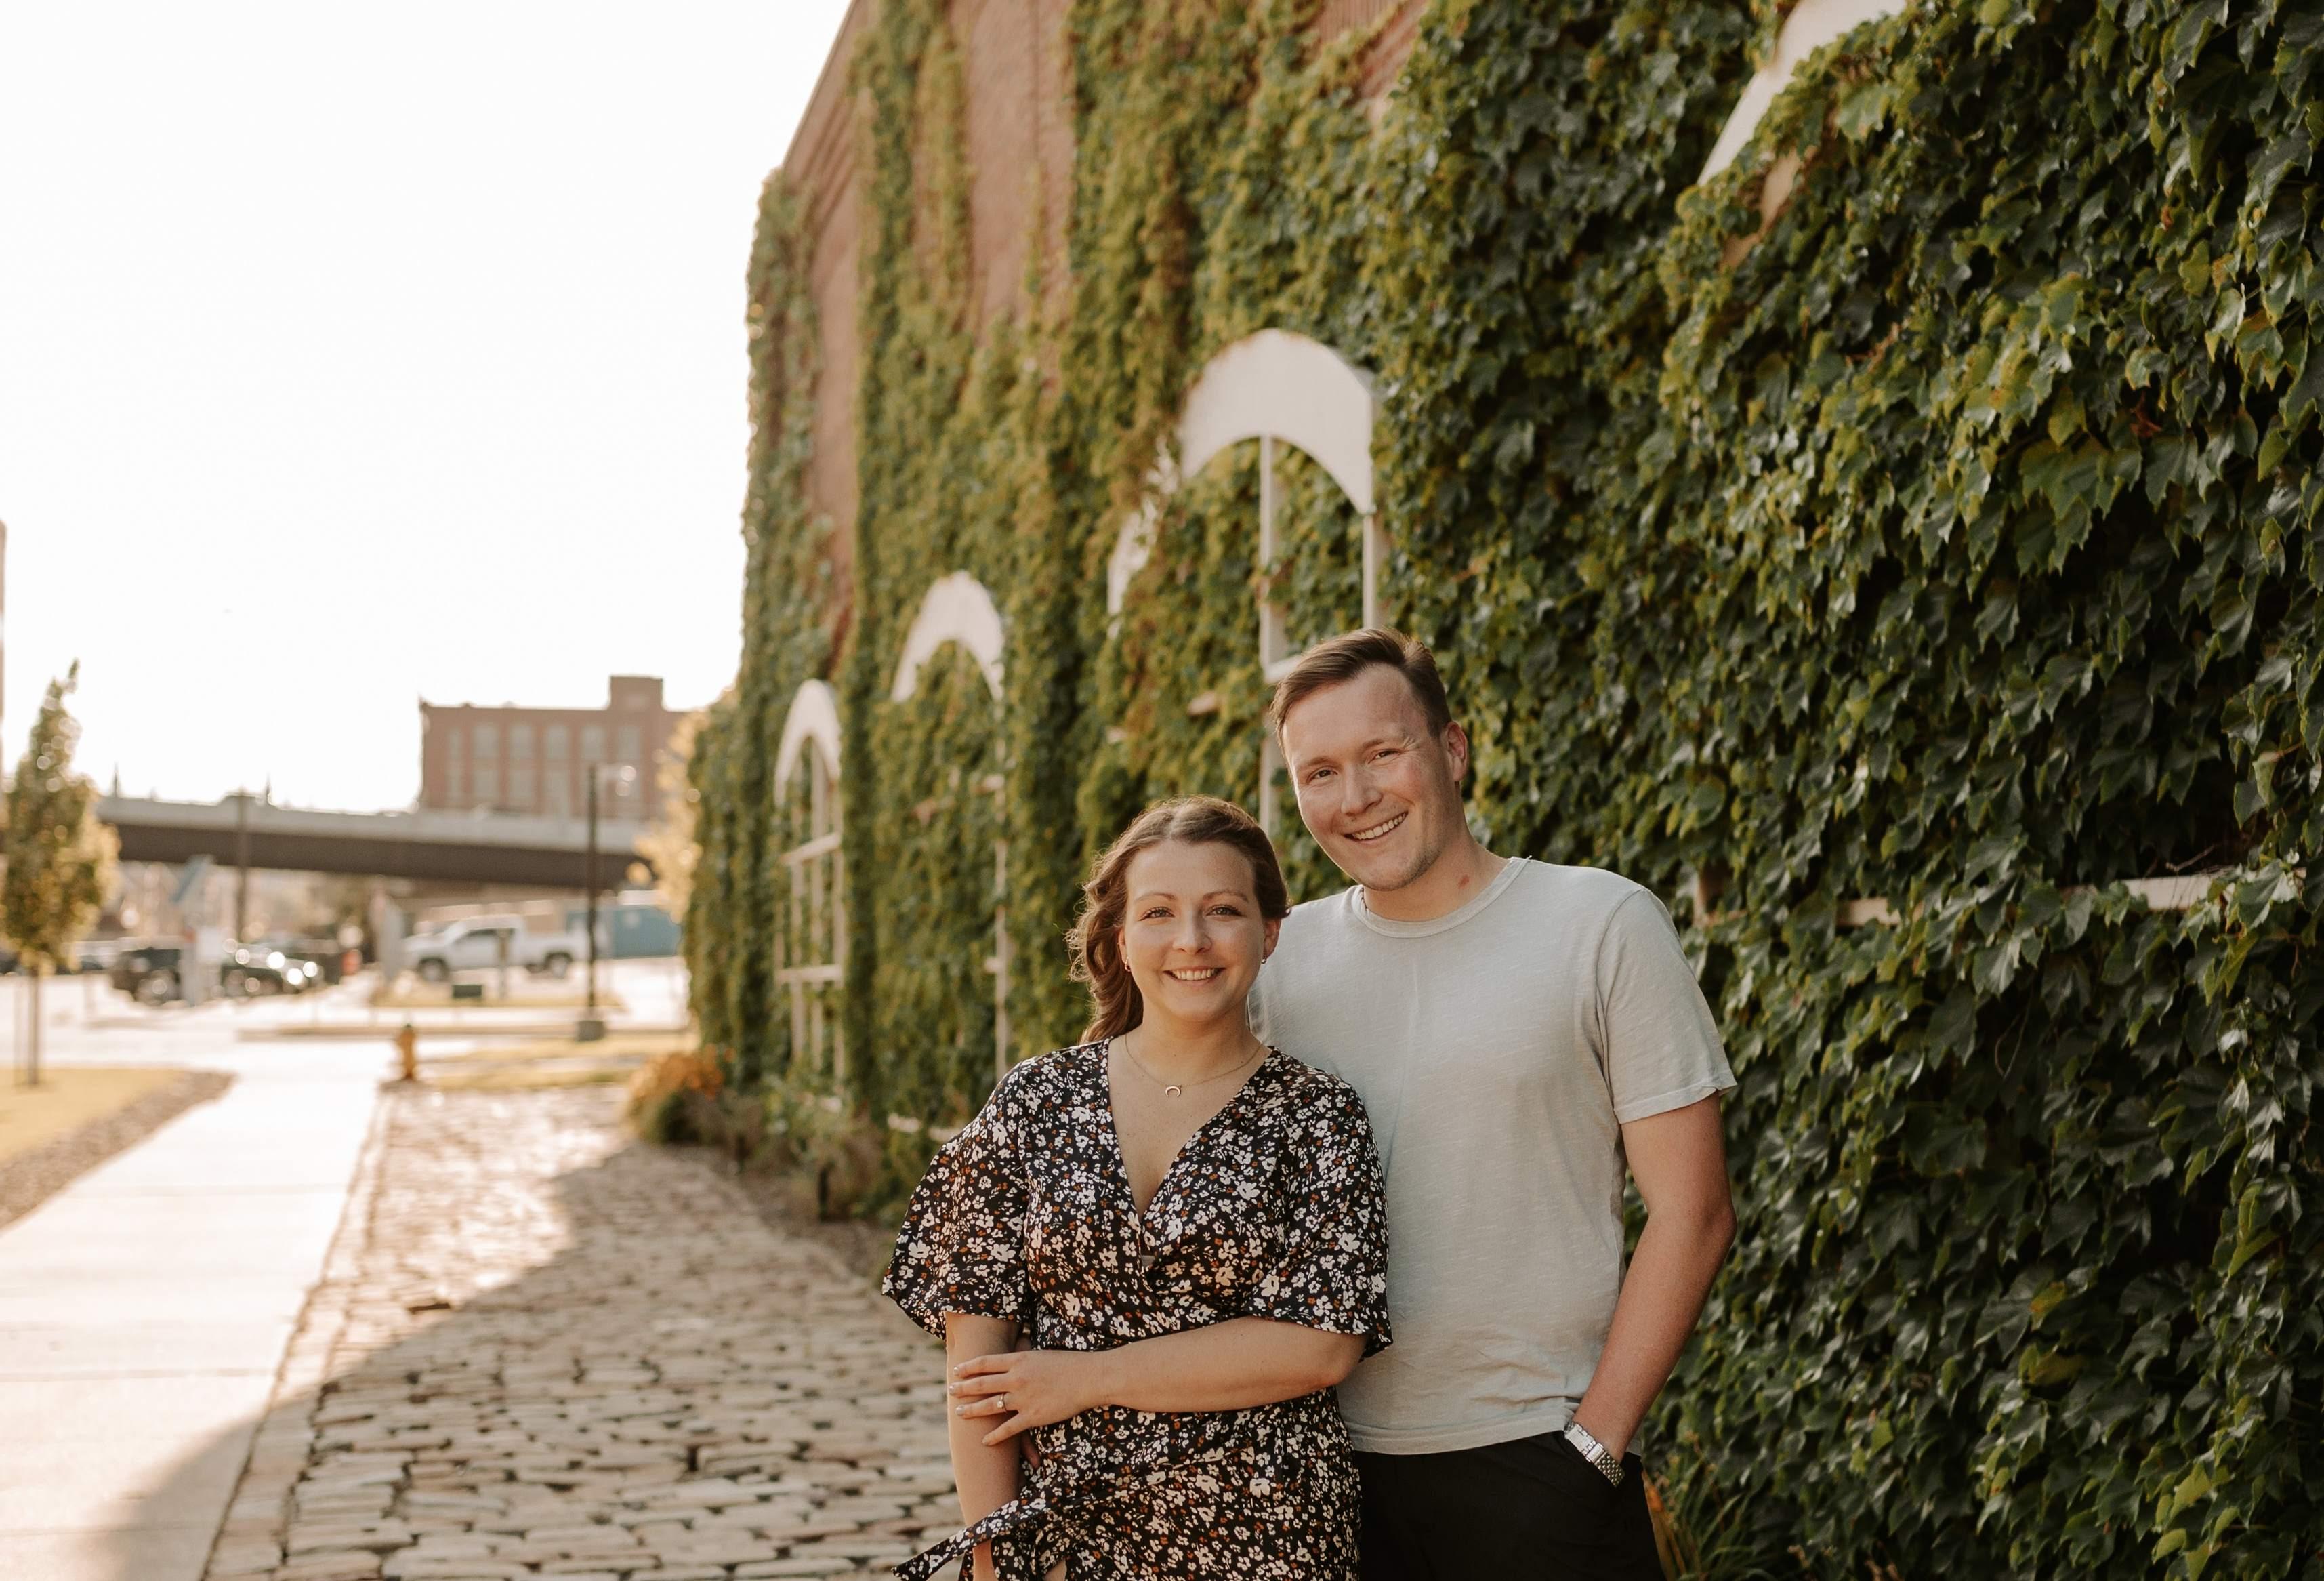 The Wedding Website of Courtney Koch and Dillon Heckendorn